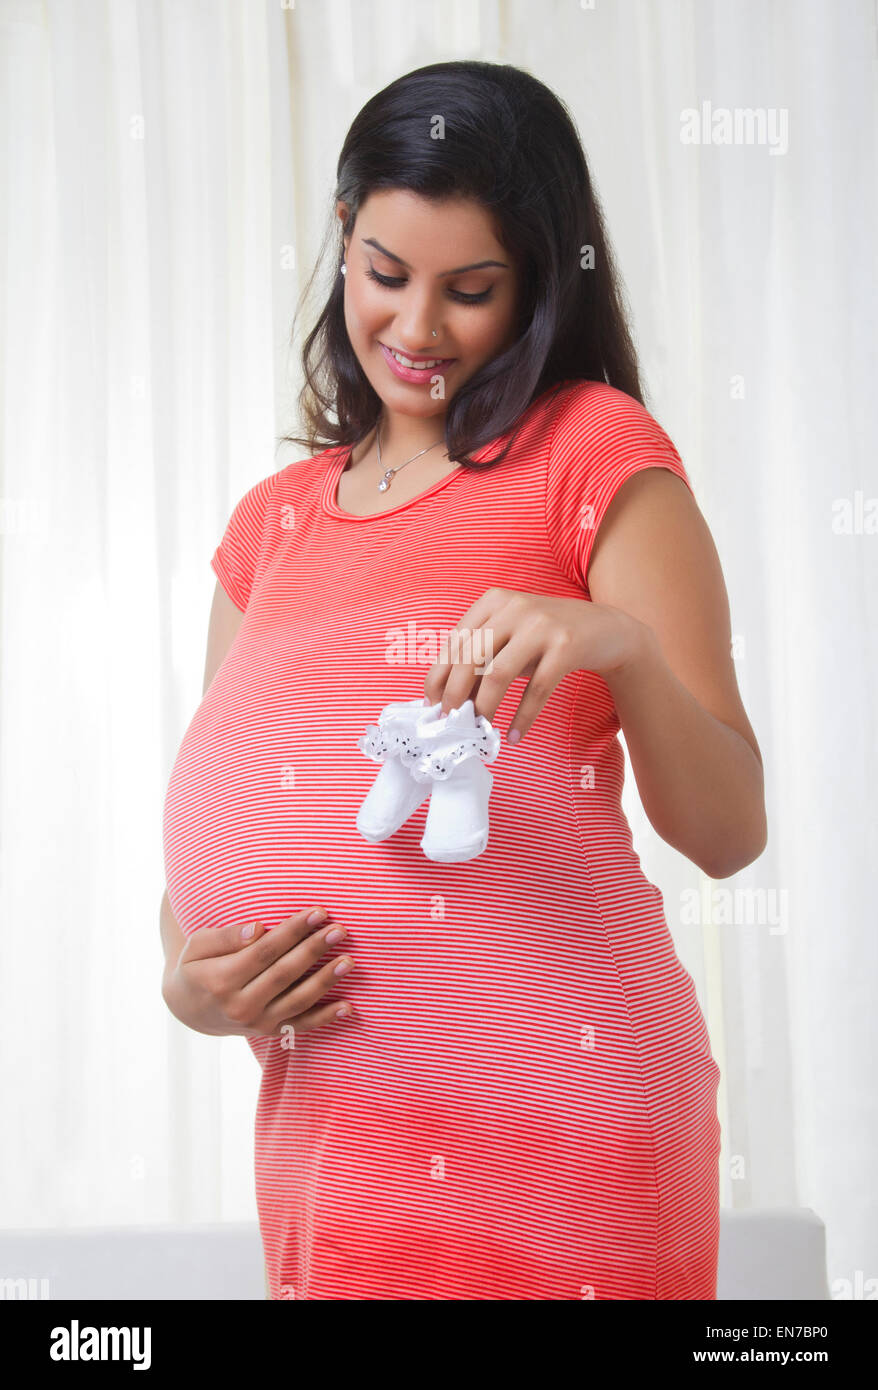 Pregnant mother holding baby shoes Stock Photo